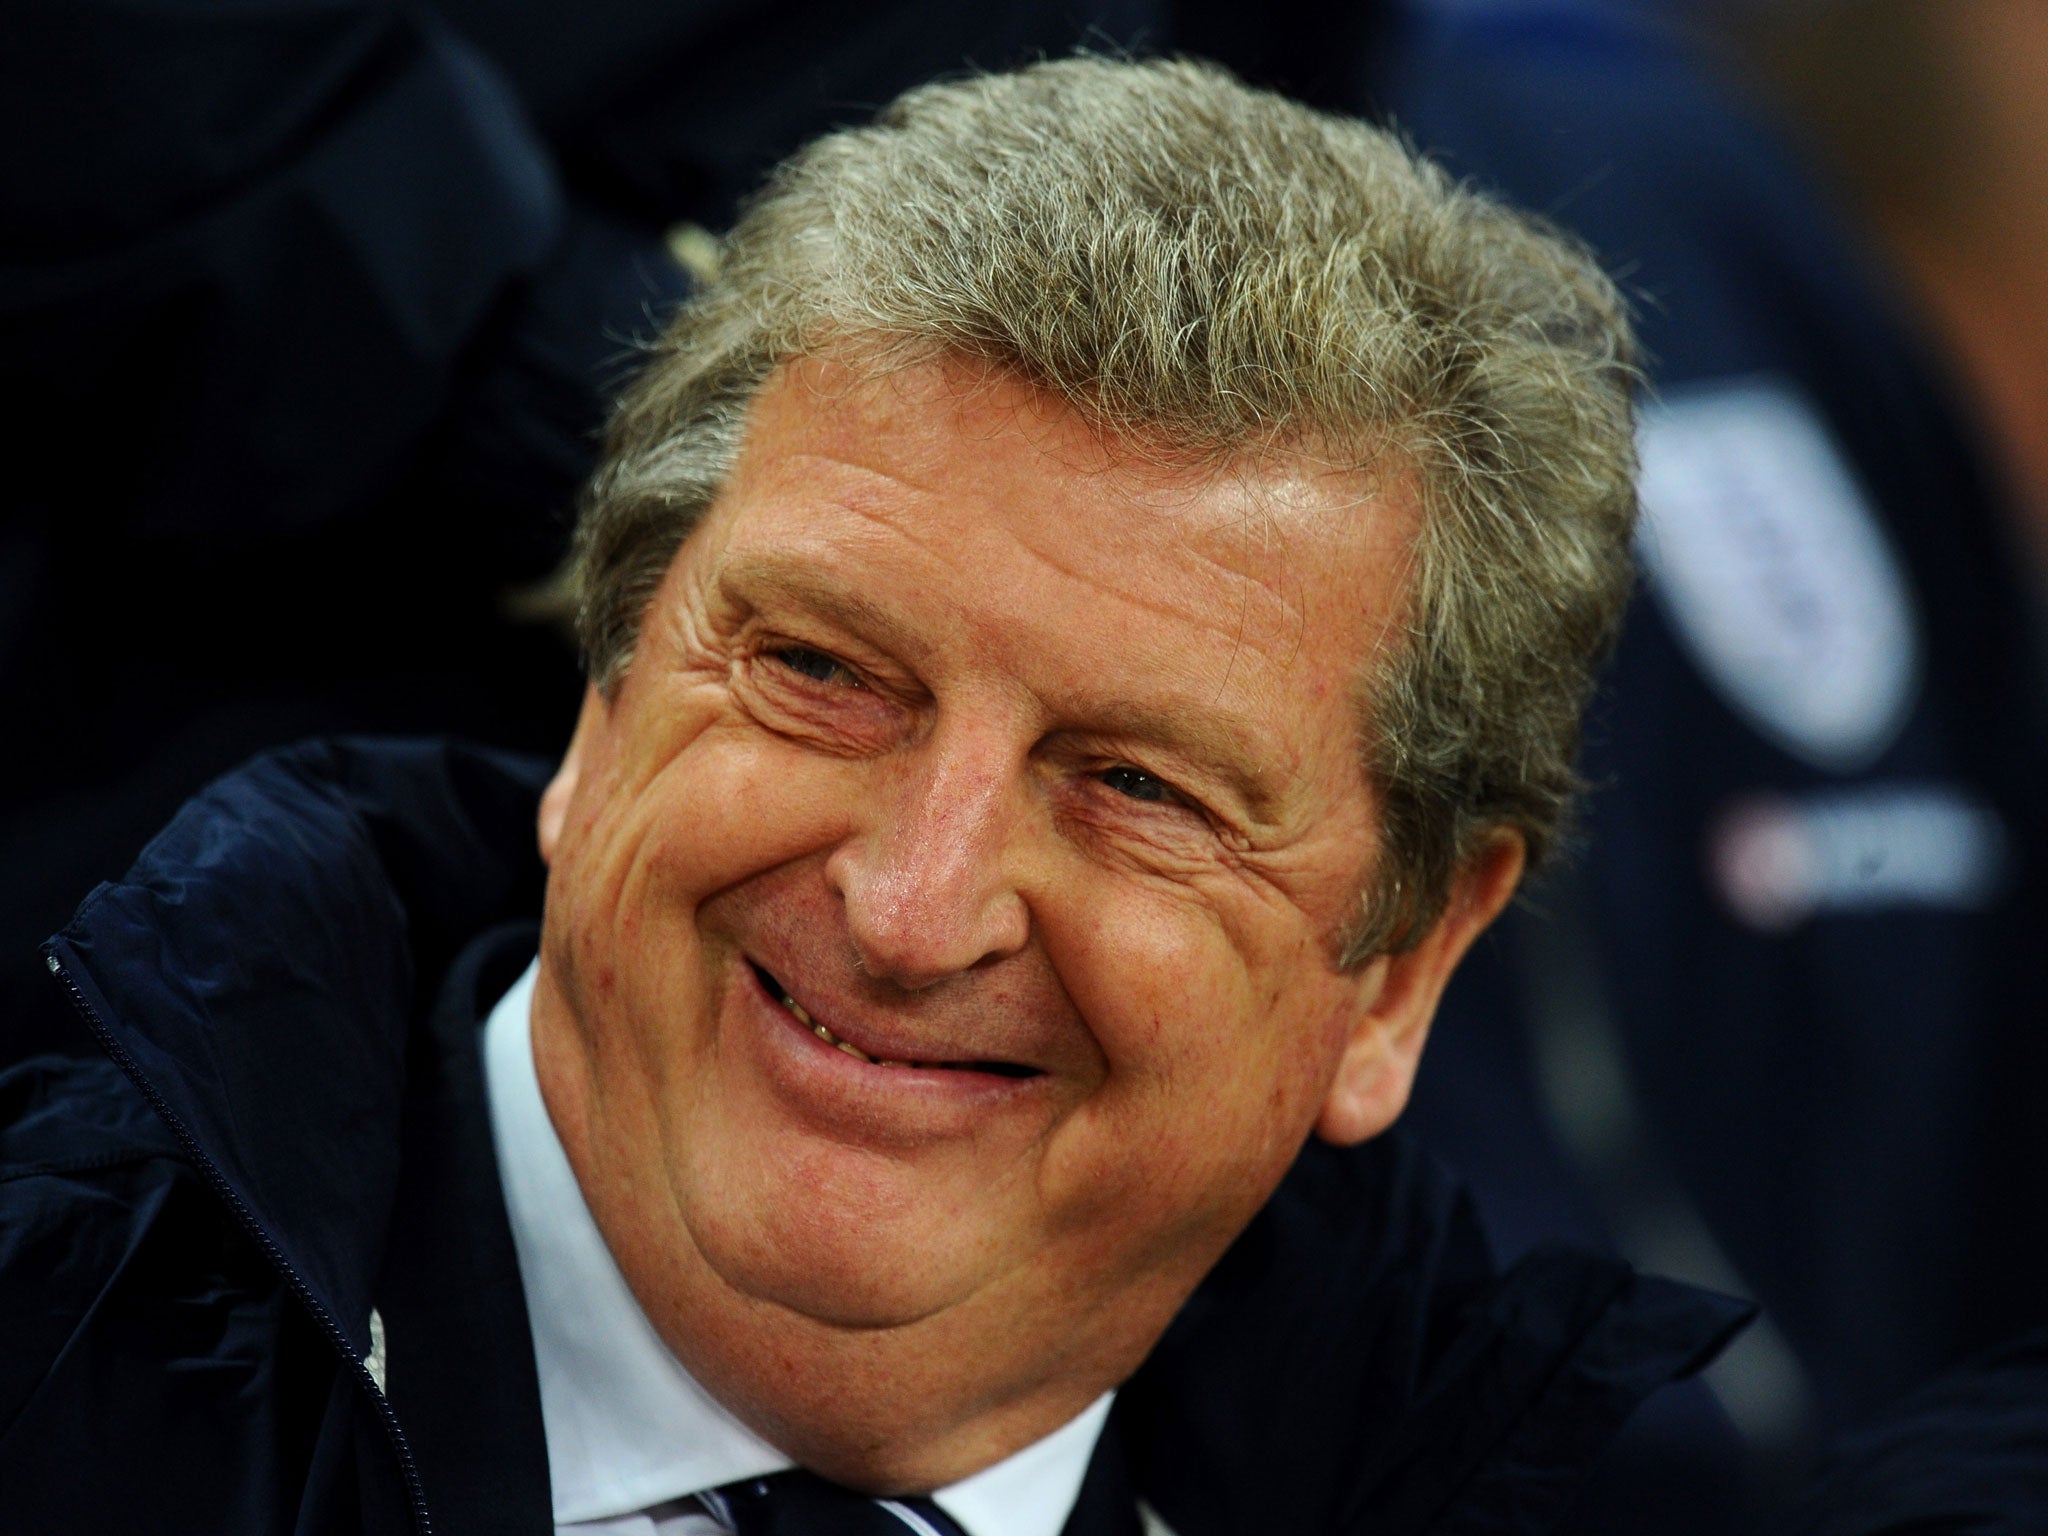 Roy Hodgson was all smiles after England qualified for the 2014 World Cup with a 2-0 win over Poland